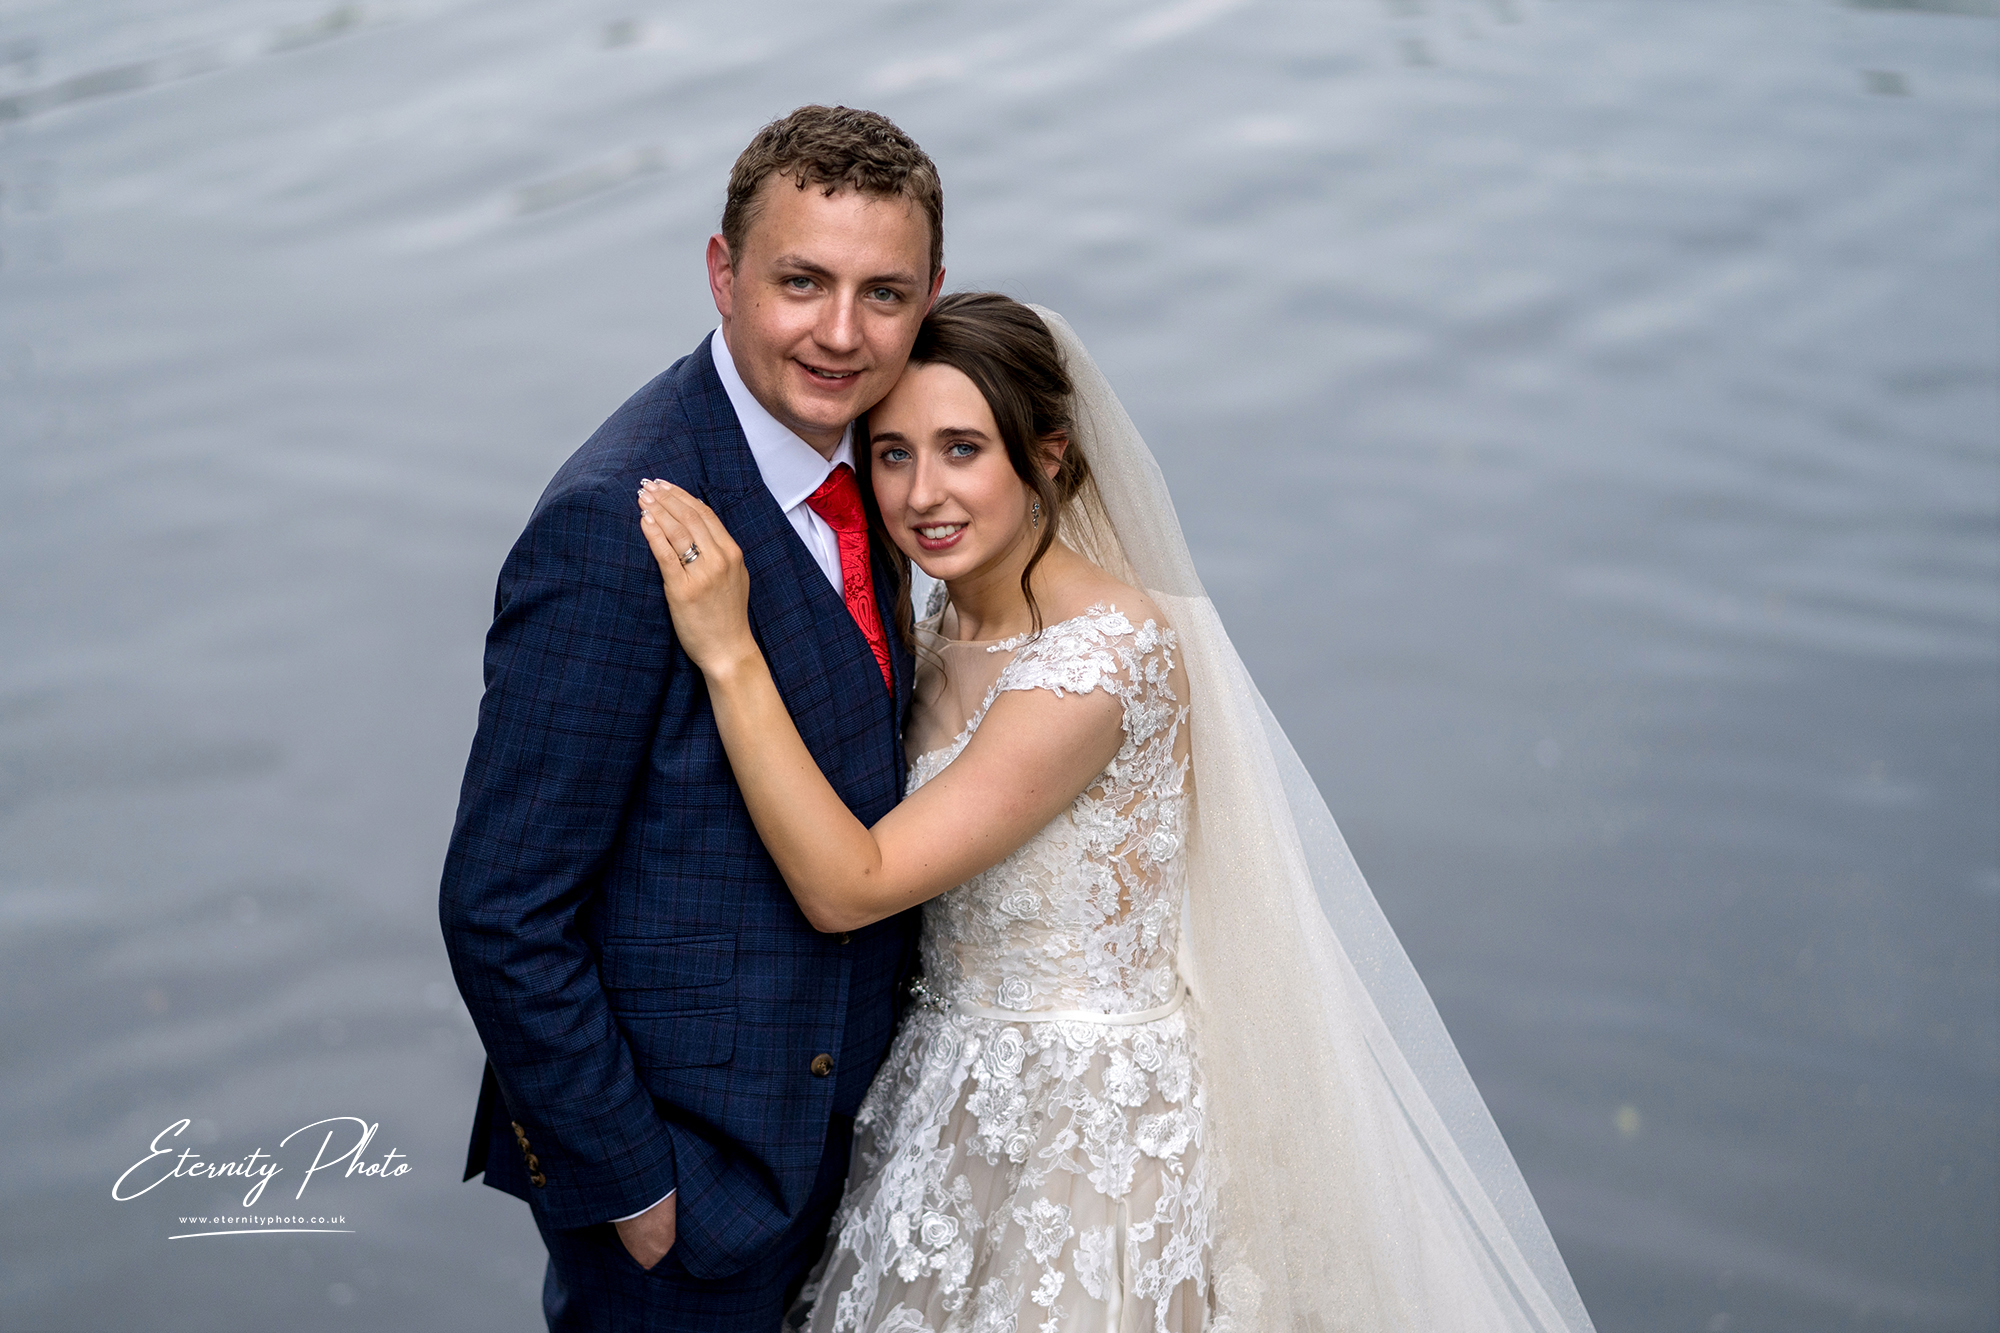 Bride and groom posing by water, wedding day photograph.